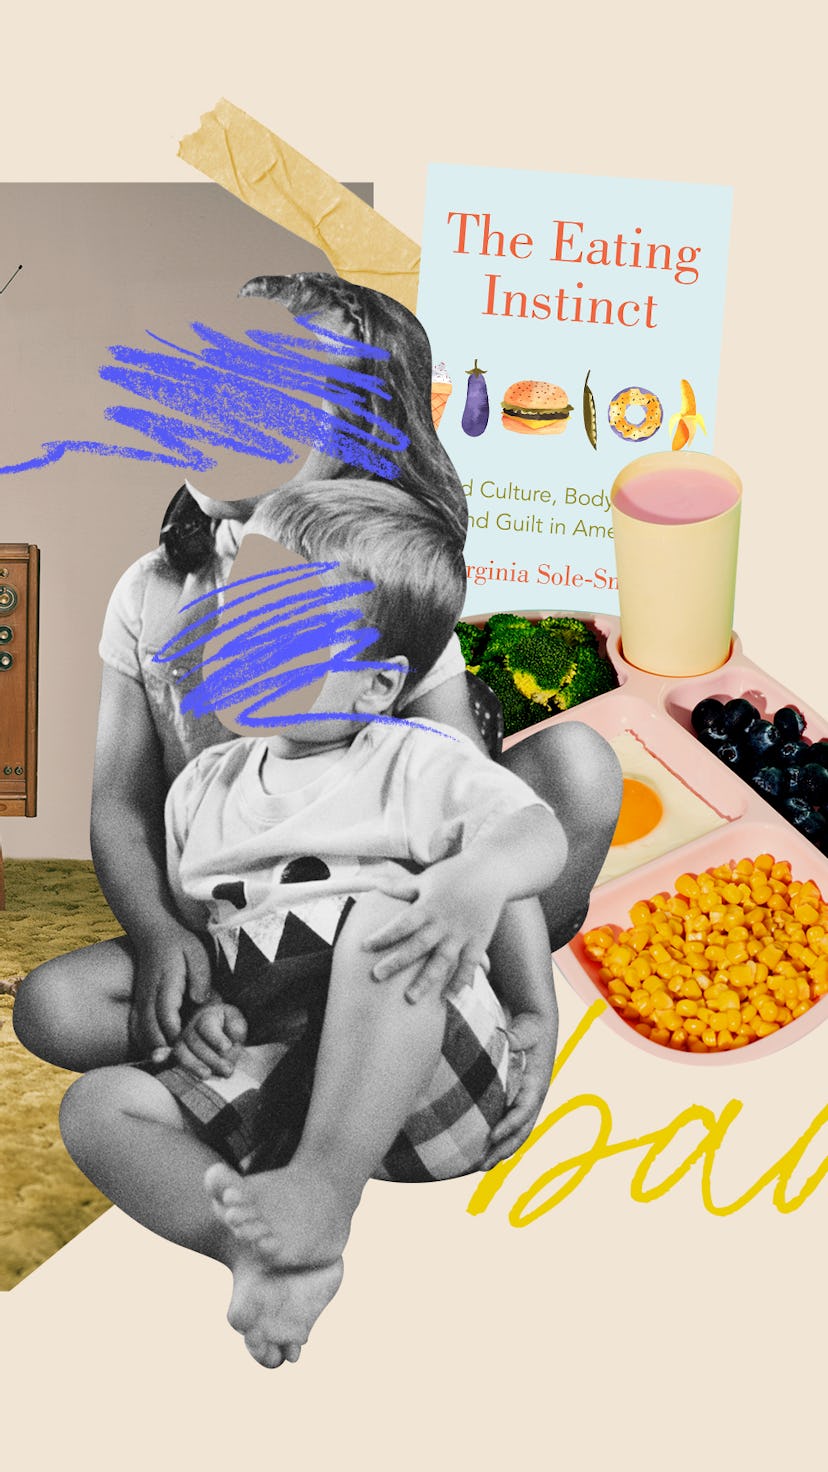 A collage of Virginia Sole-Smith's book, an old TV, dinner foods and two kids sitting on the floor 